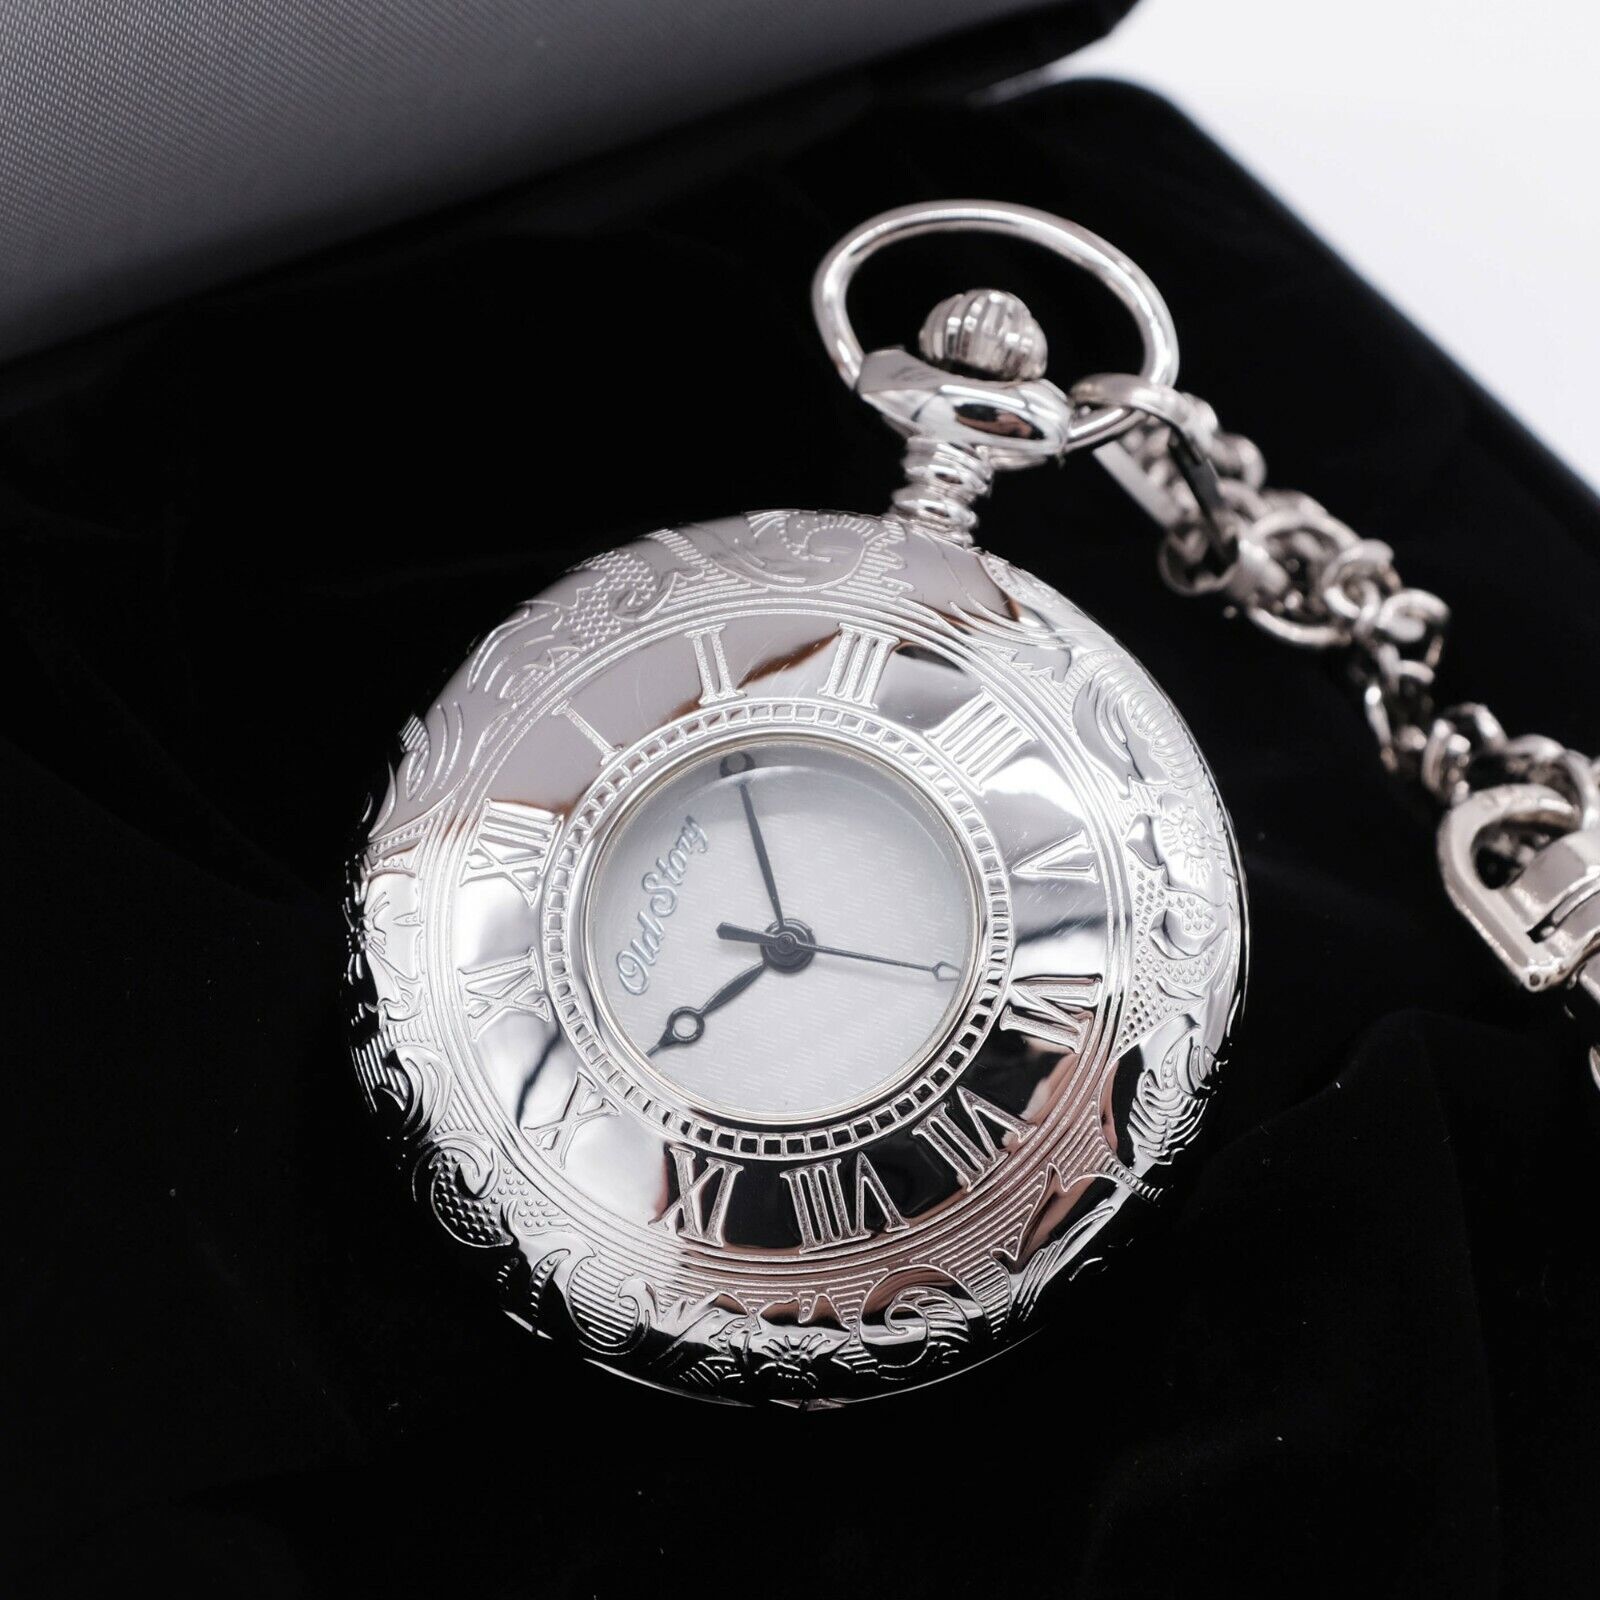 Old Story Sigma Premium Pocket Watch Unique Steampunk Style Watch MADE IN KOREA